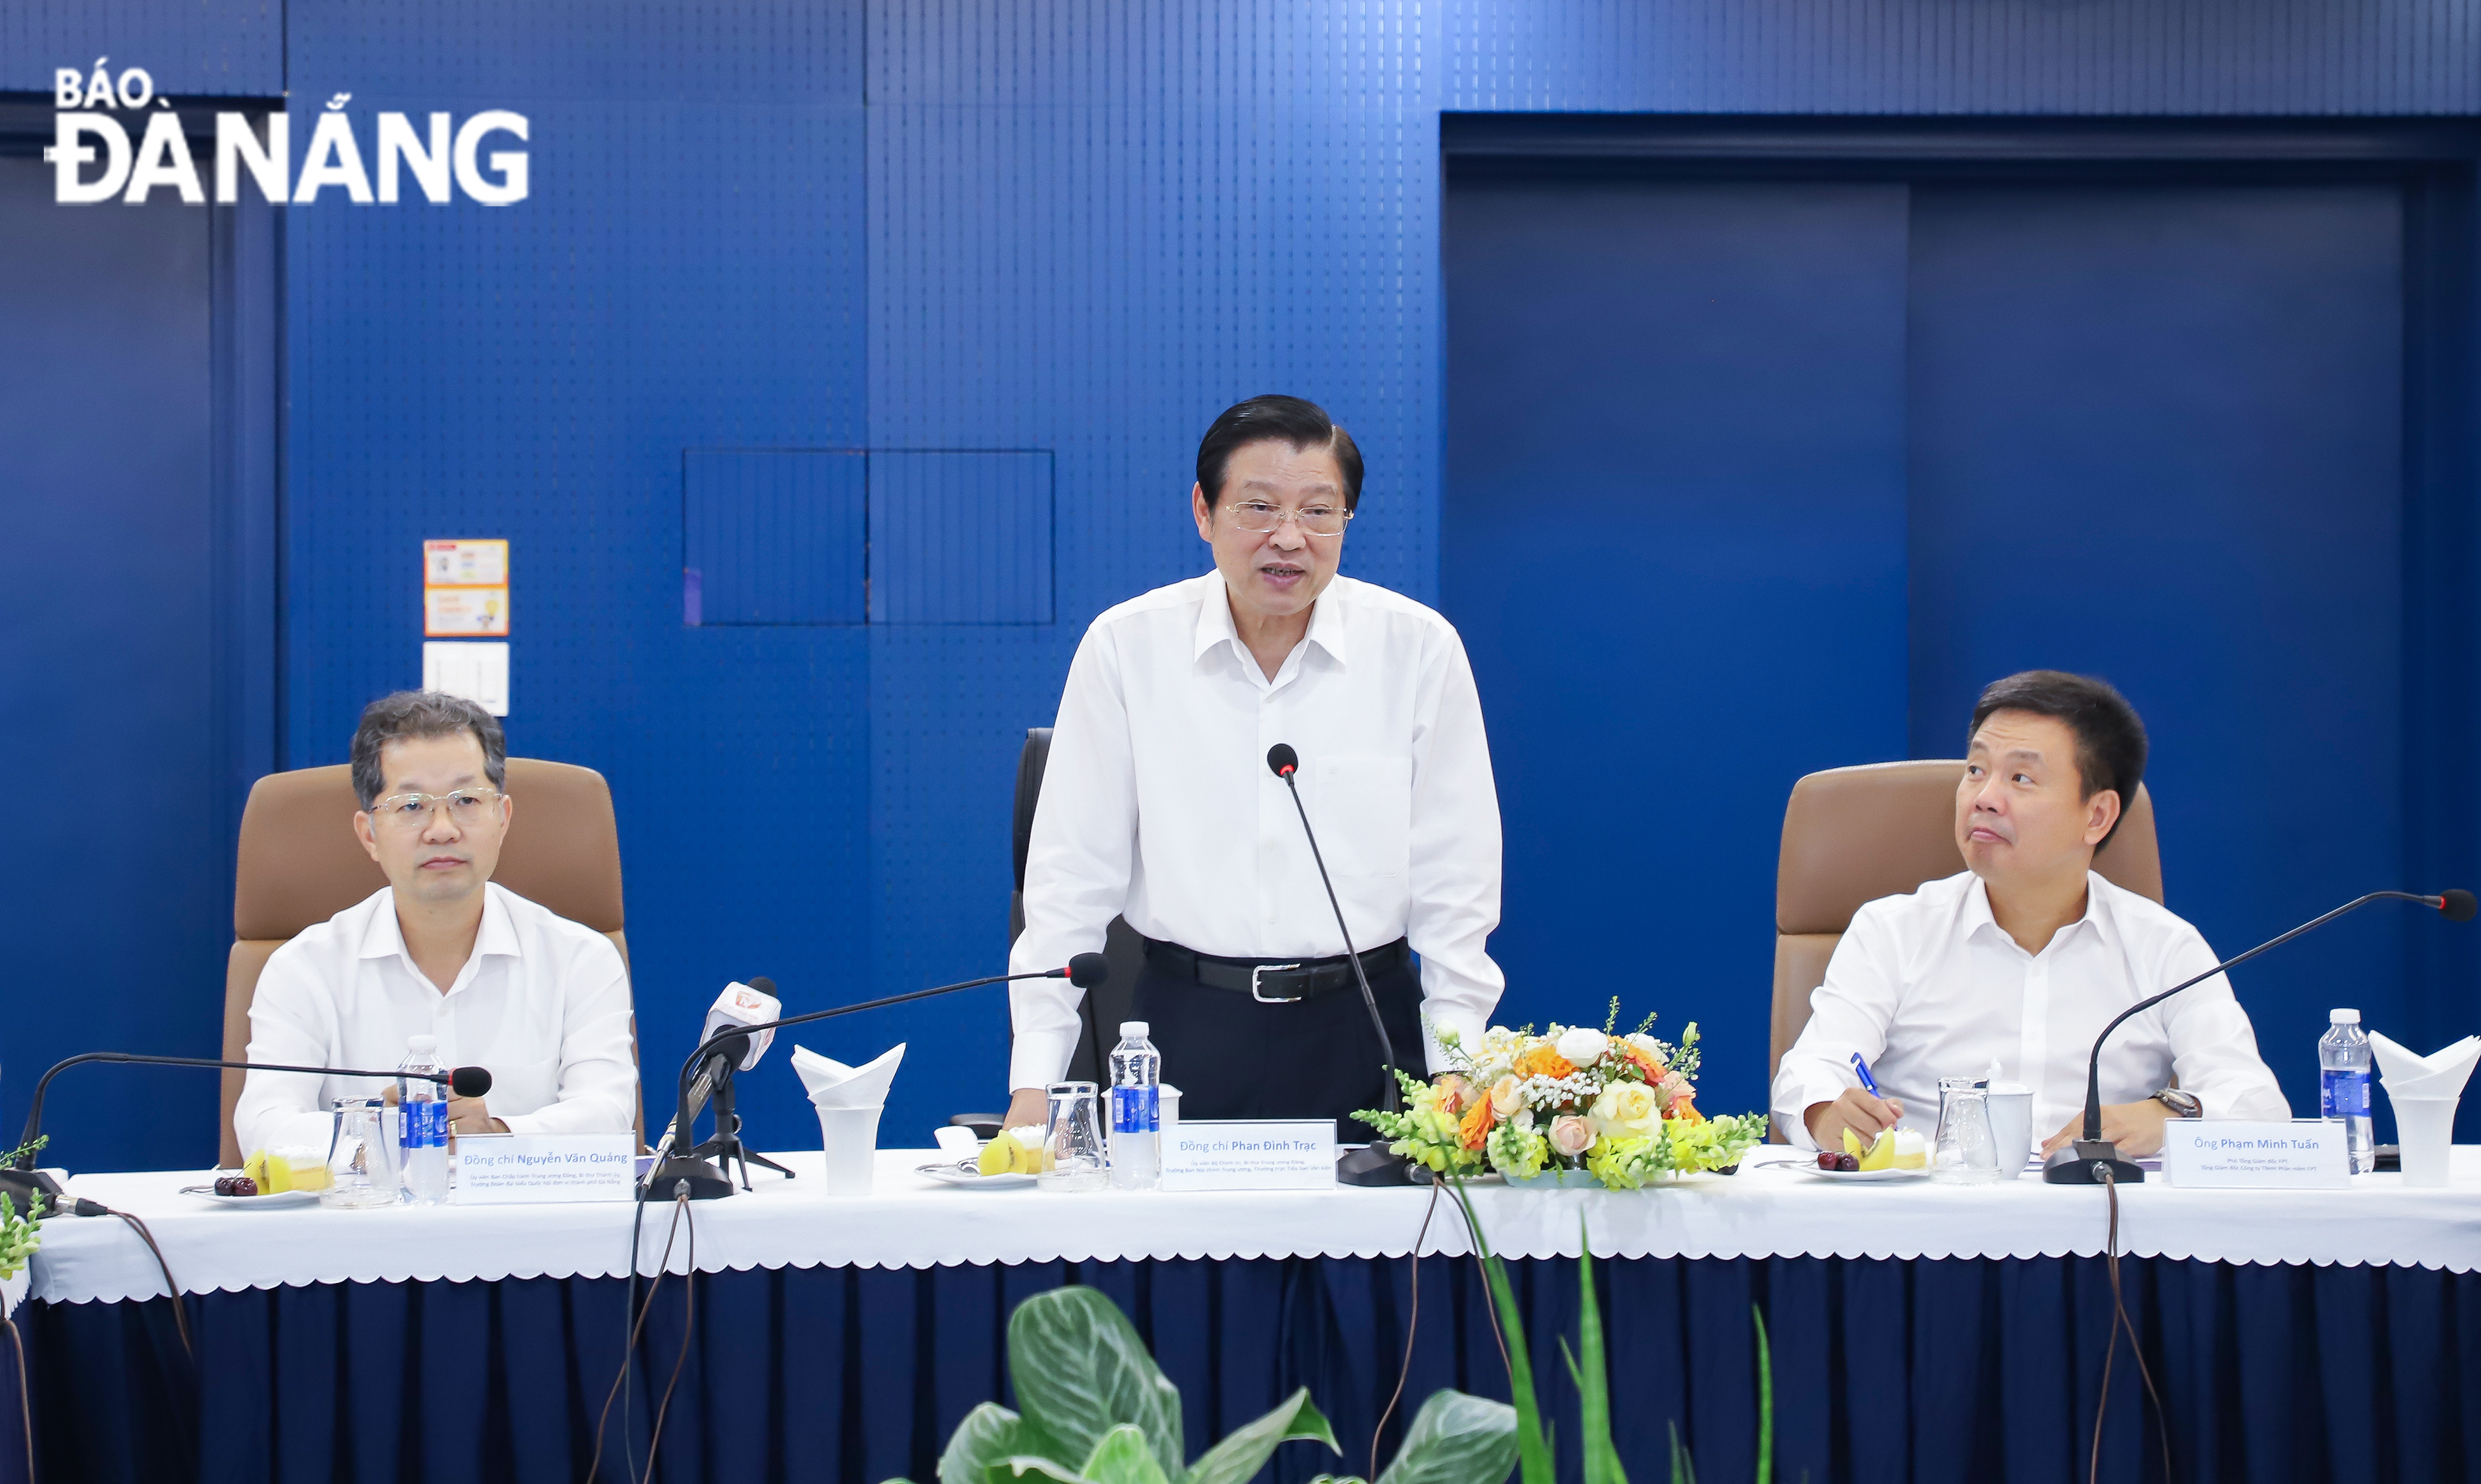 Mr. Phan Dinh Trac, Chairman of the Party Central Committee’s Commission for Internal Affairs, speaking at the meeting with leaders of the FPT Corporation